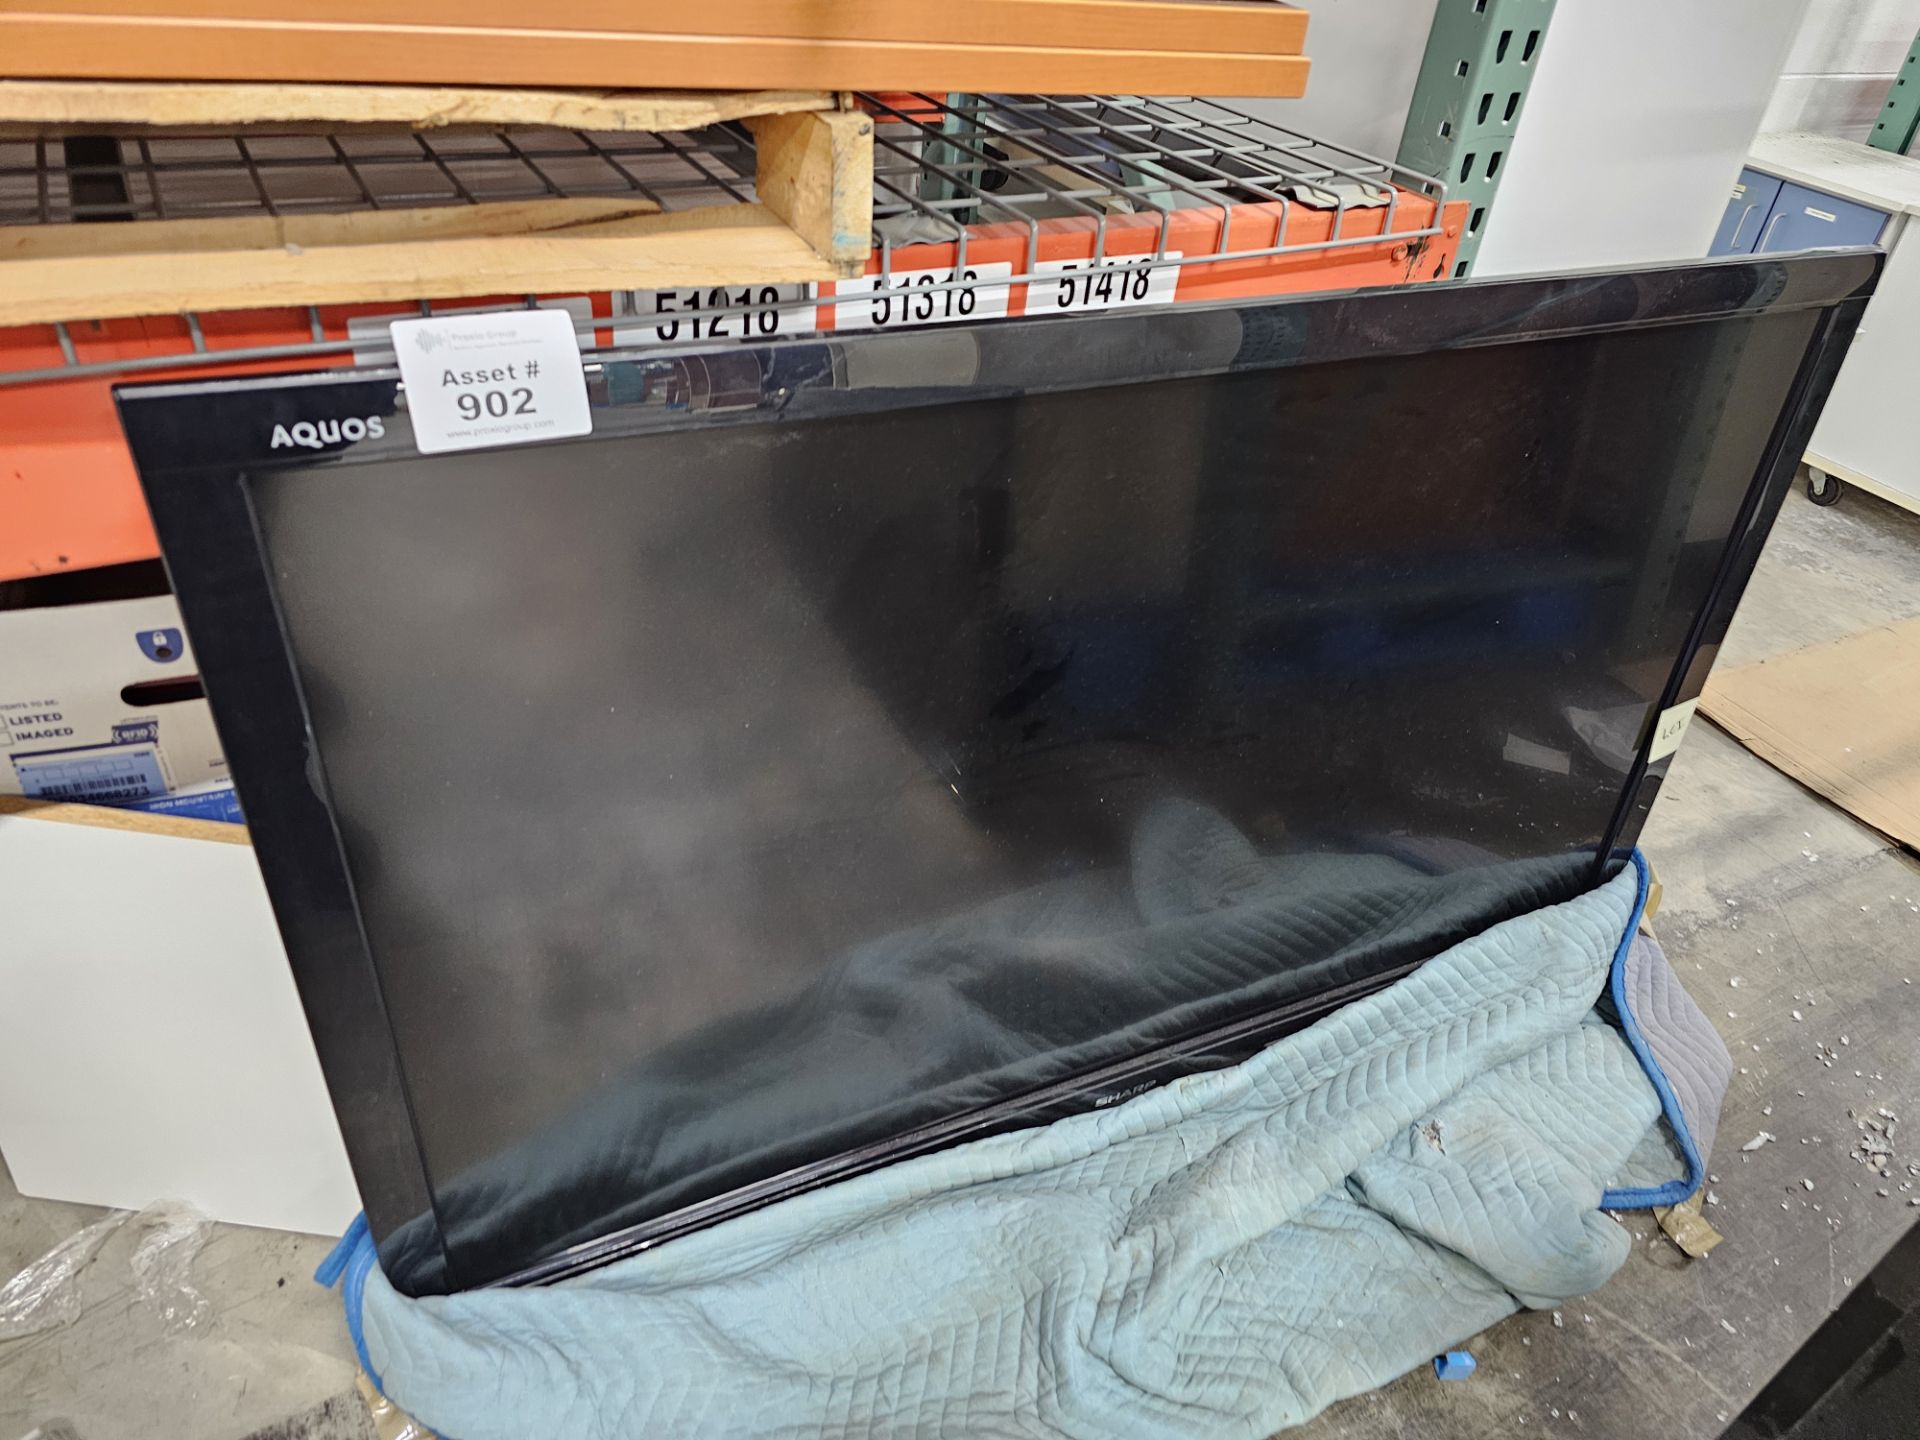 (2) Sharp Aquos TVs (1) Approx 65" TV with Liquid Crystal Display, (1) Approx 50" LCD Display